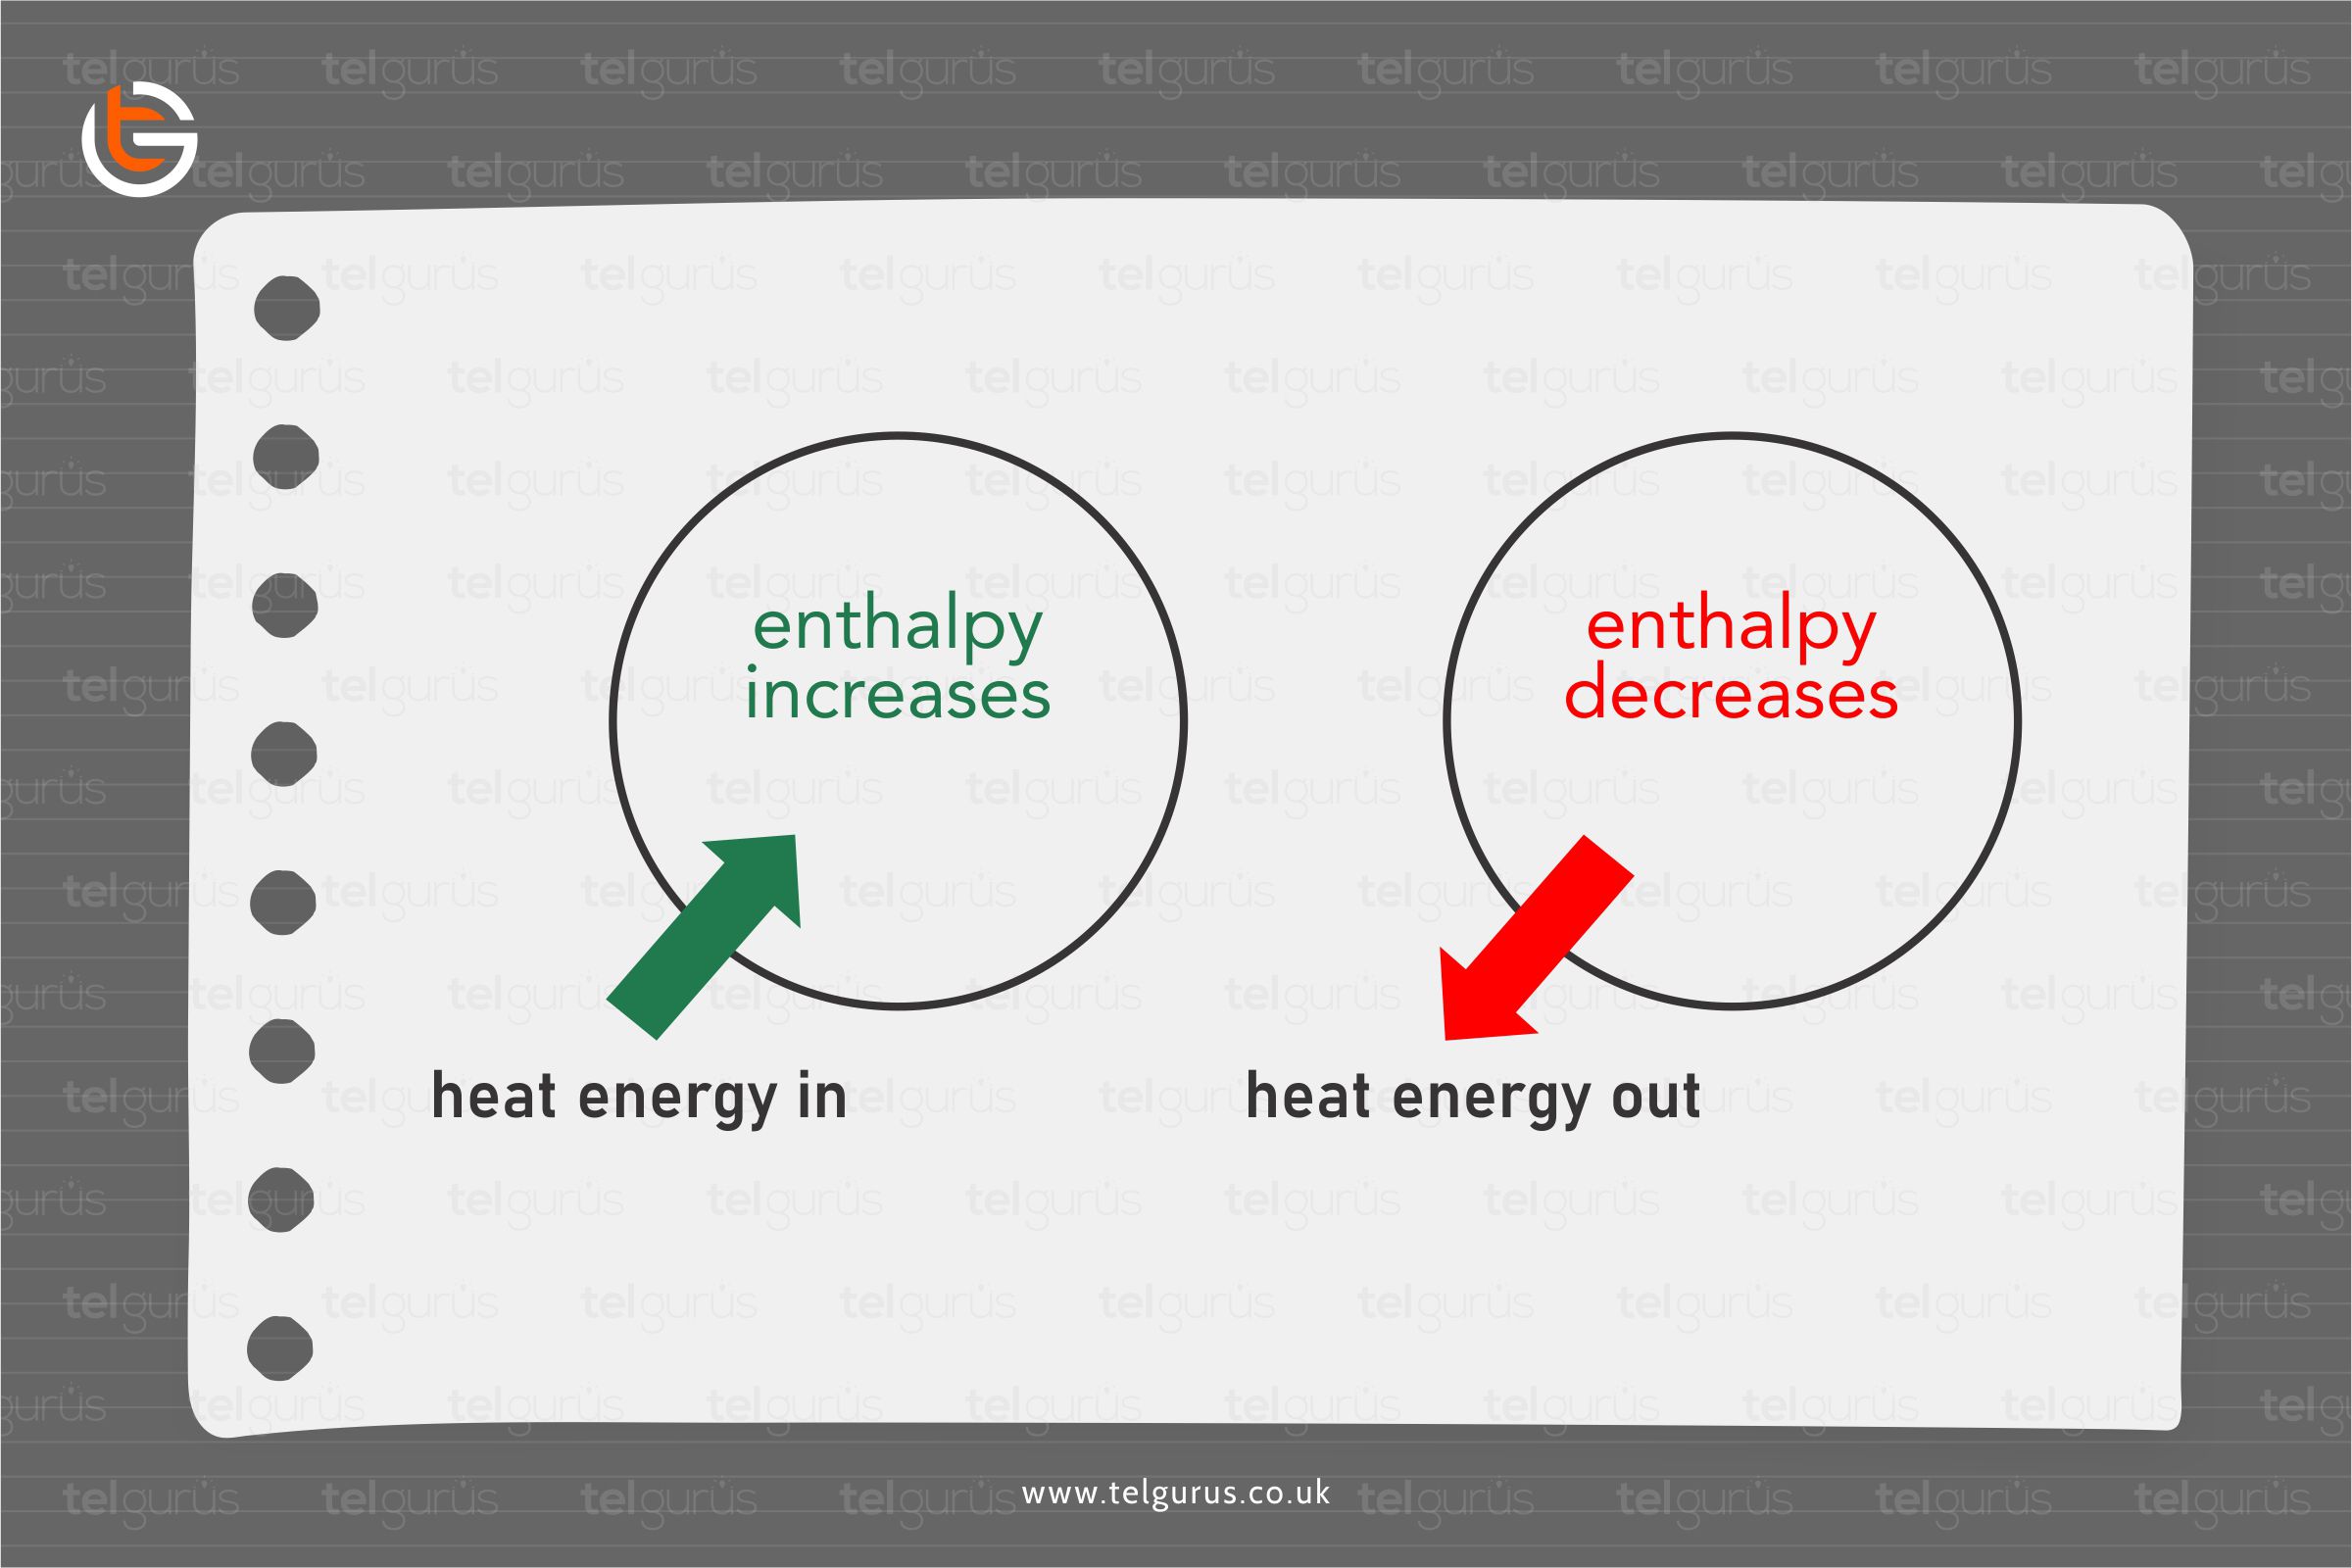 How do I know if an enthalpy change should be positive or negative?